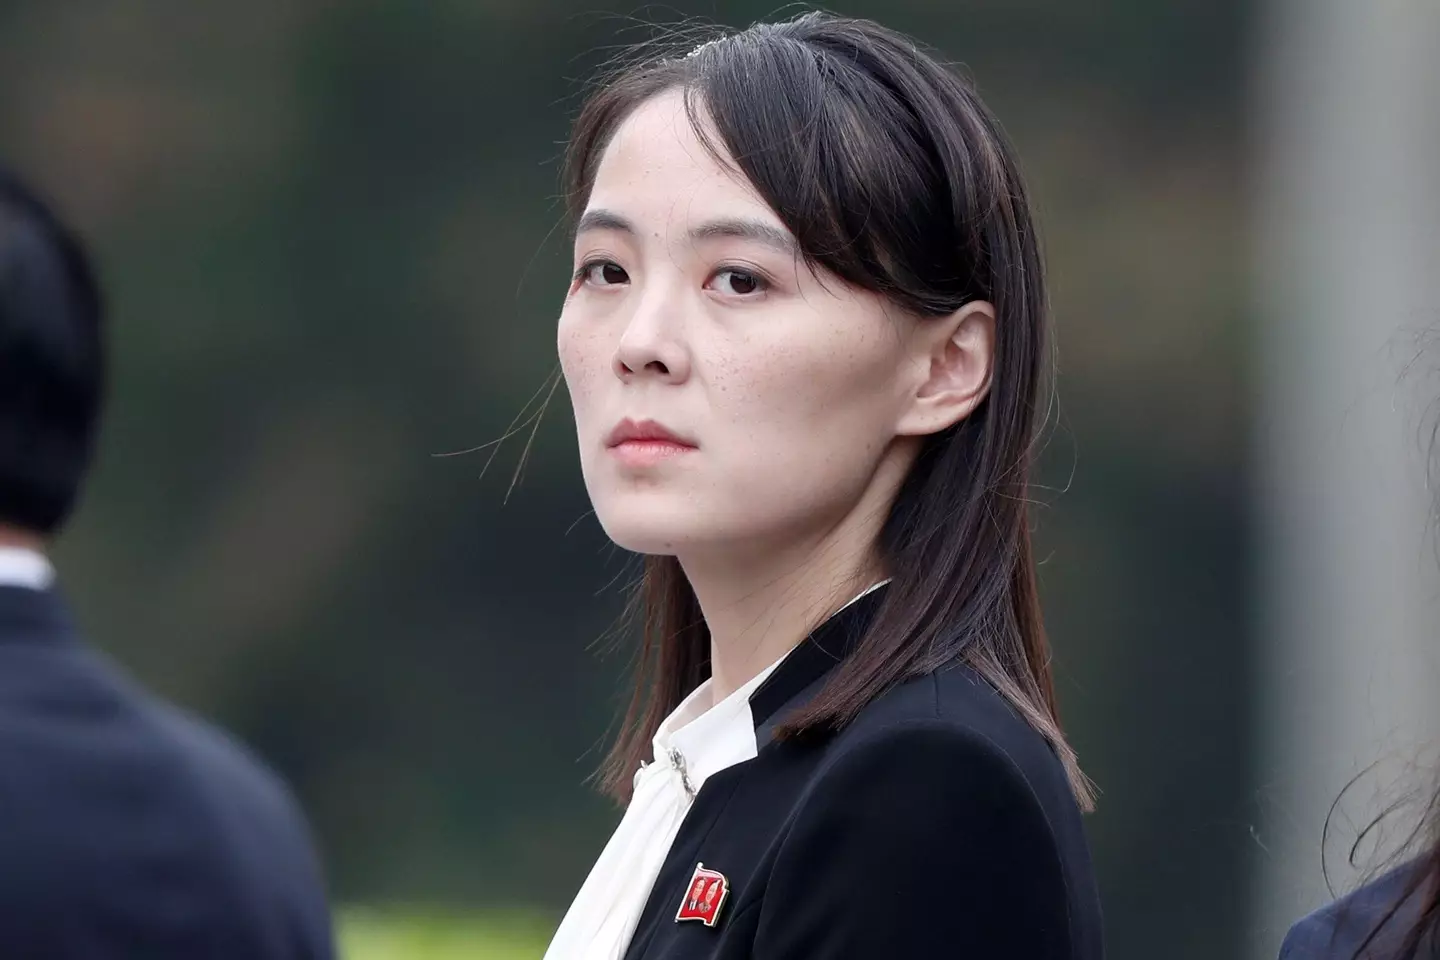 Kim Yo-jong warned the South could face 'a serious threat'.